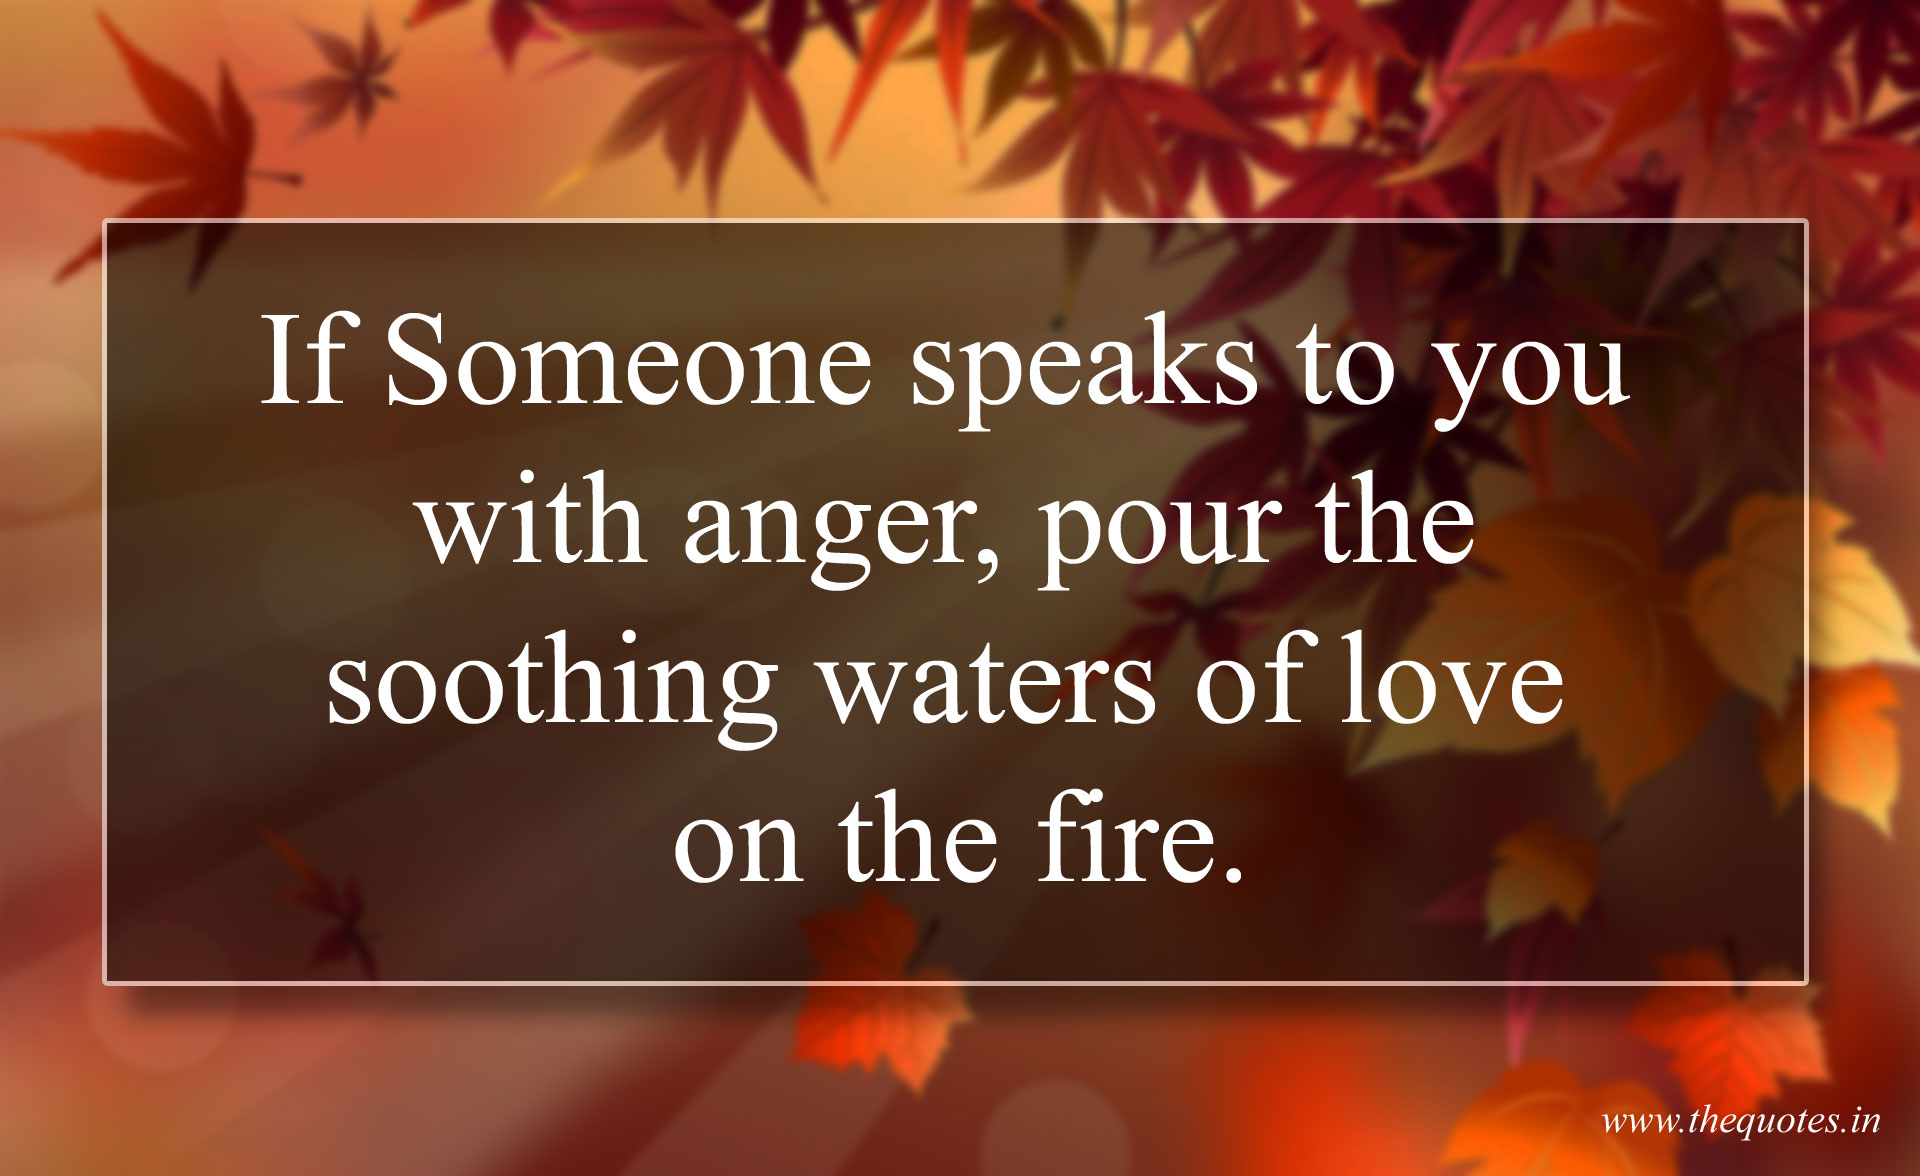 If Someone speaks to you with anger, pour the soothing waters of ...